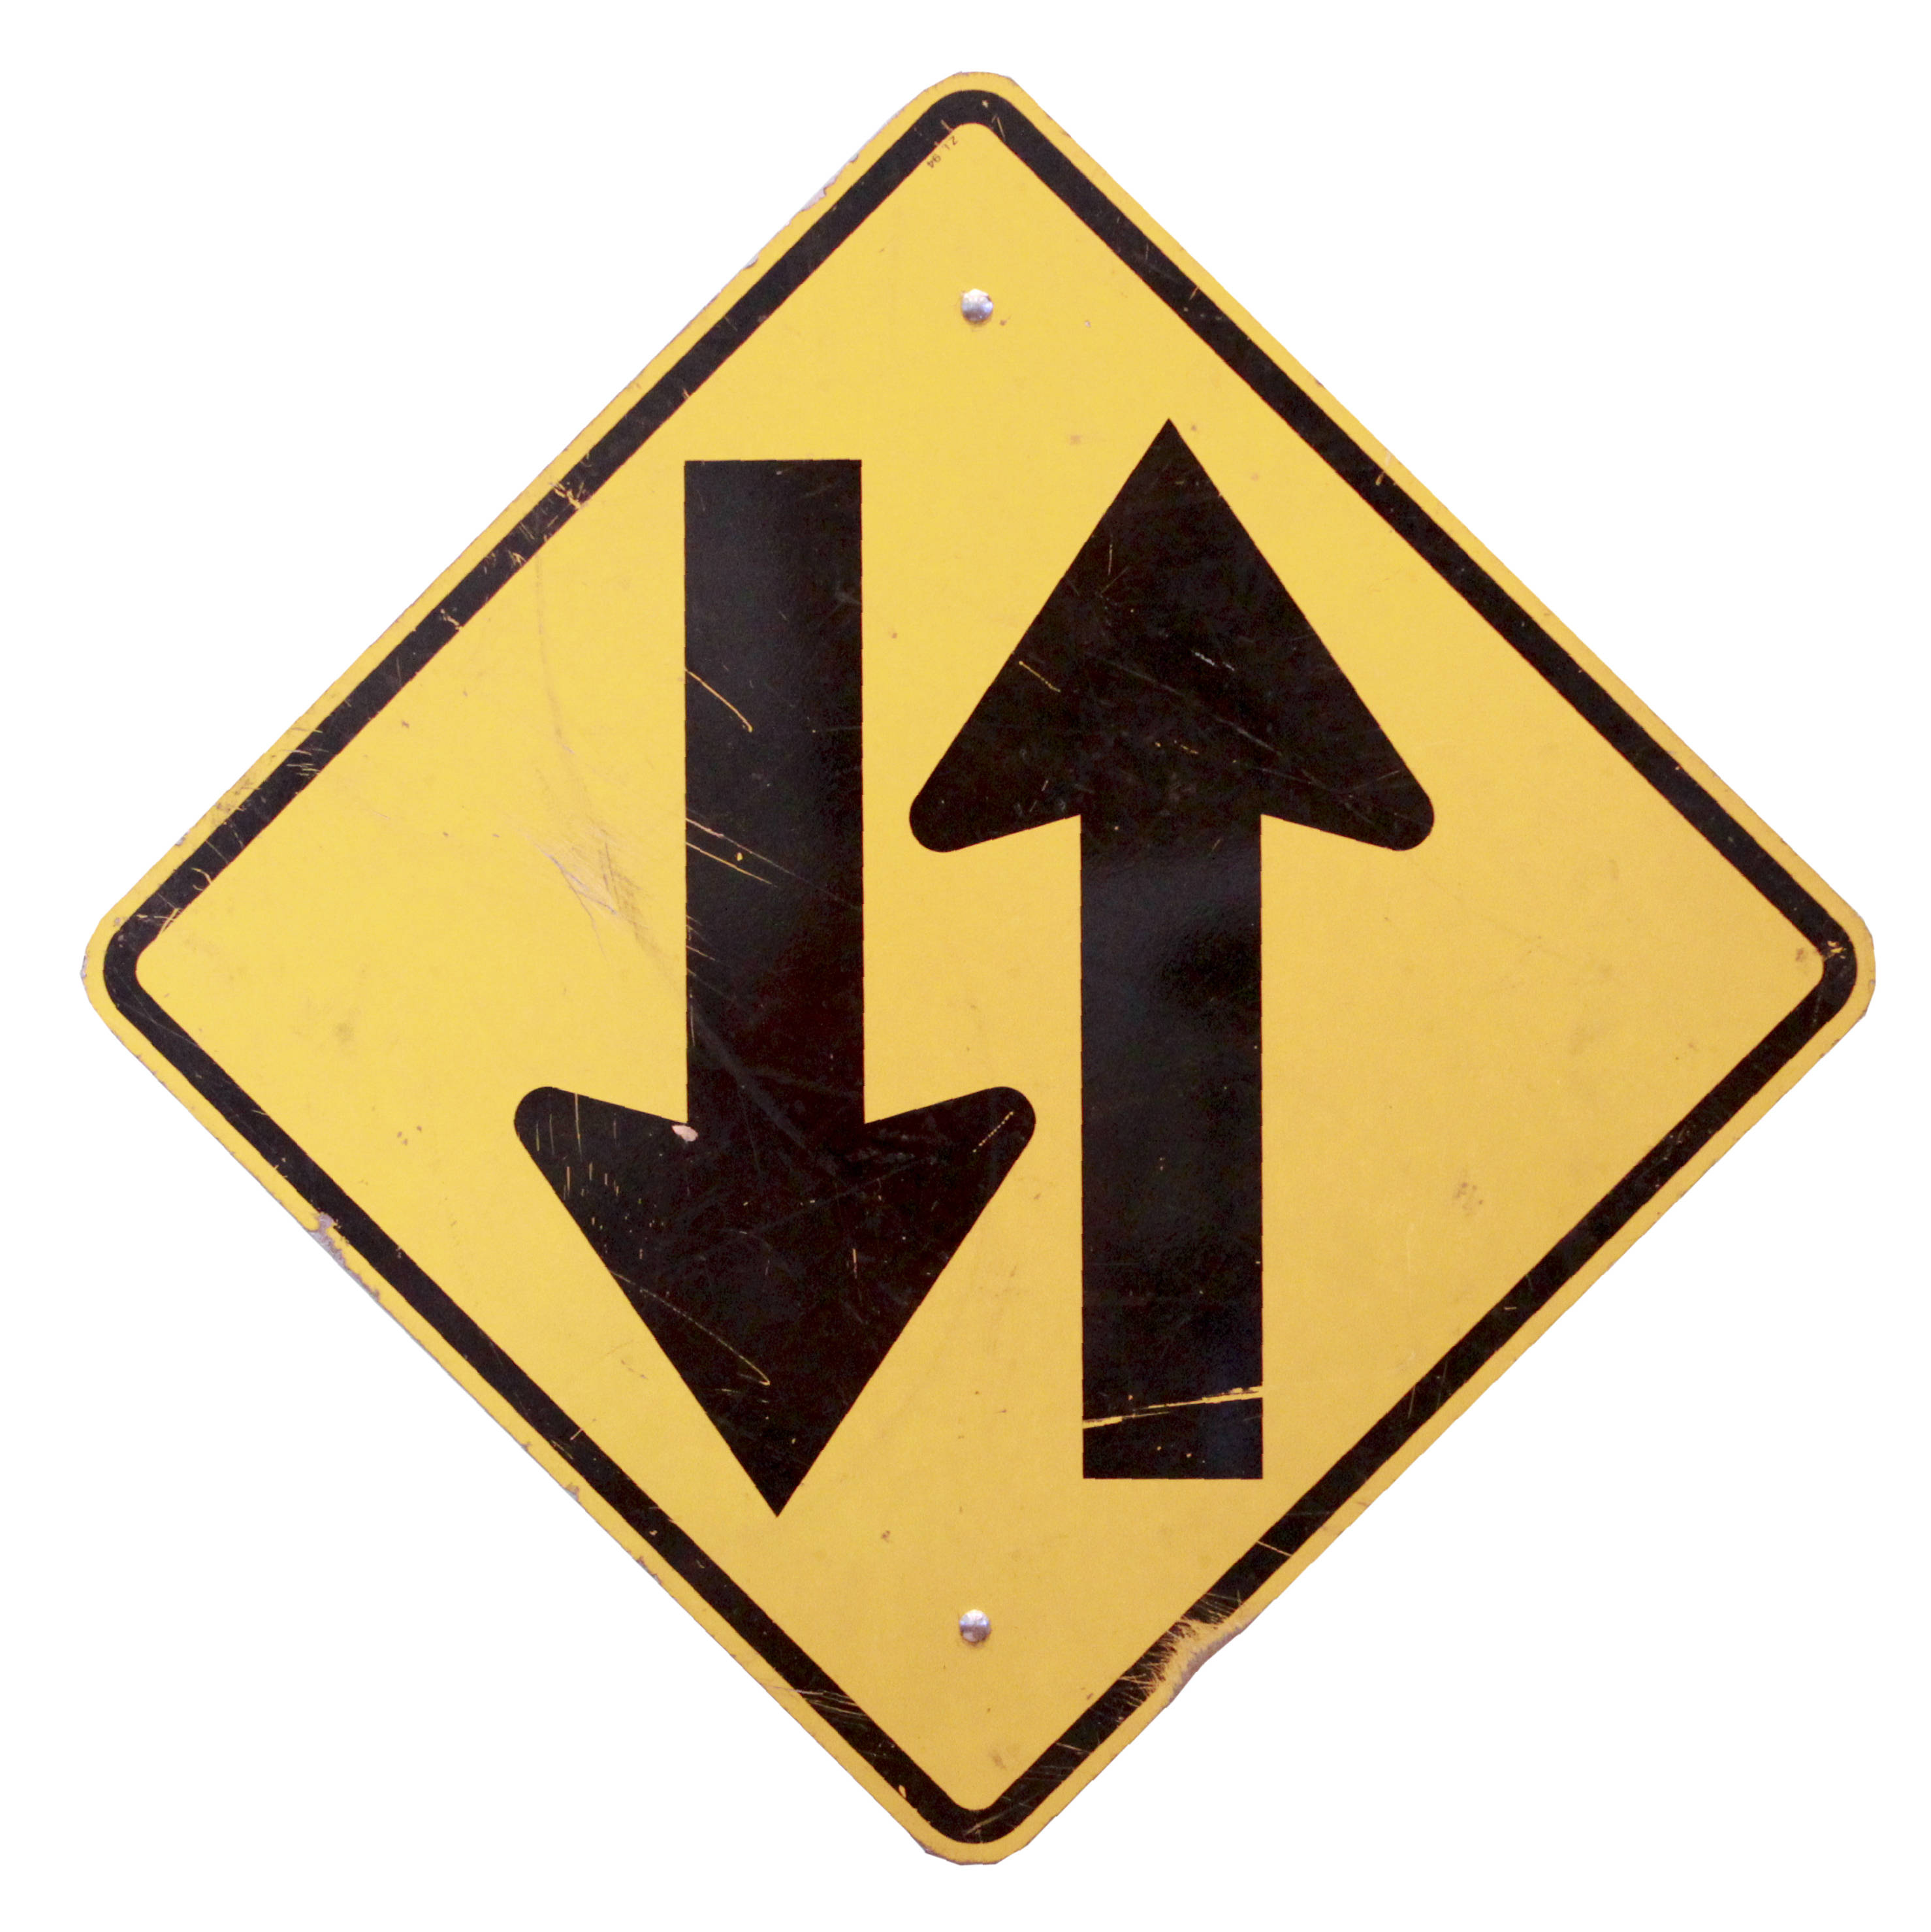 two way traffic sign ahead